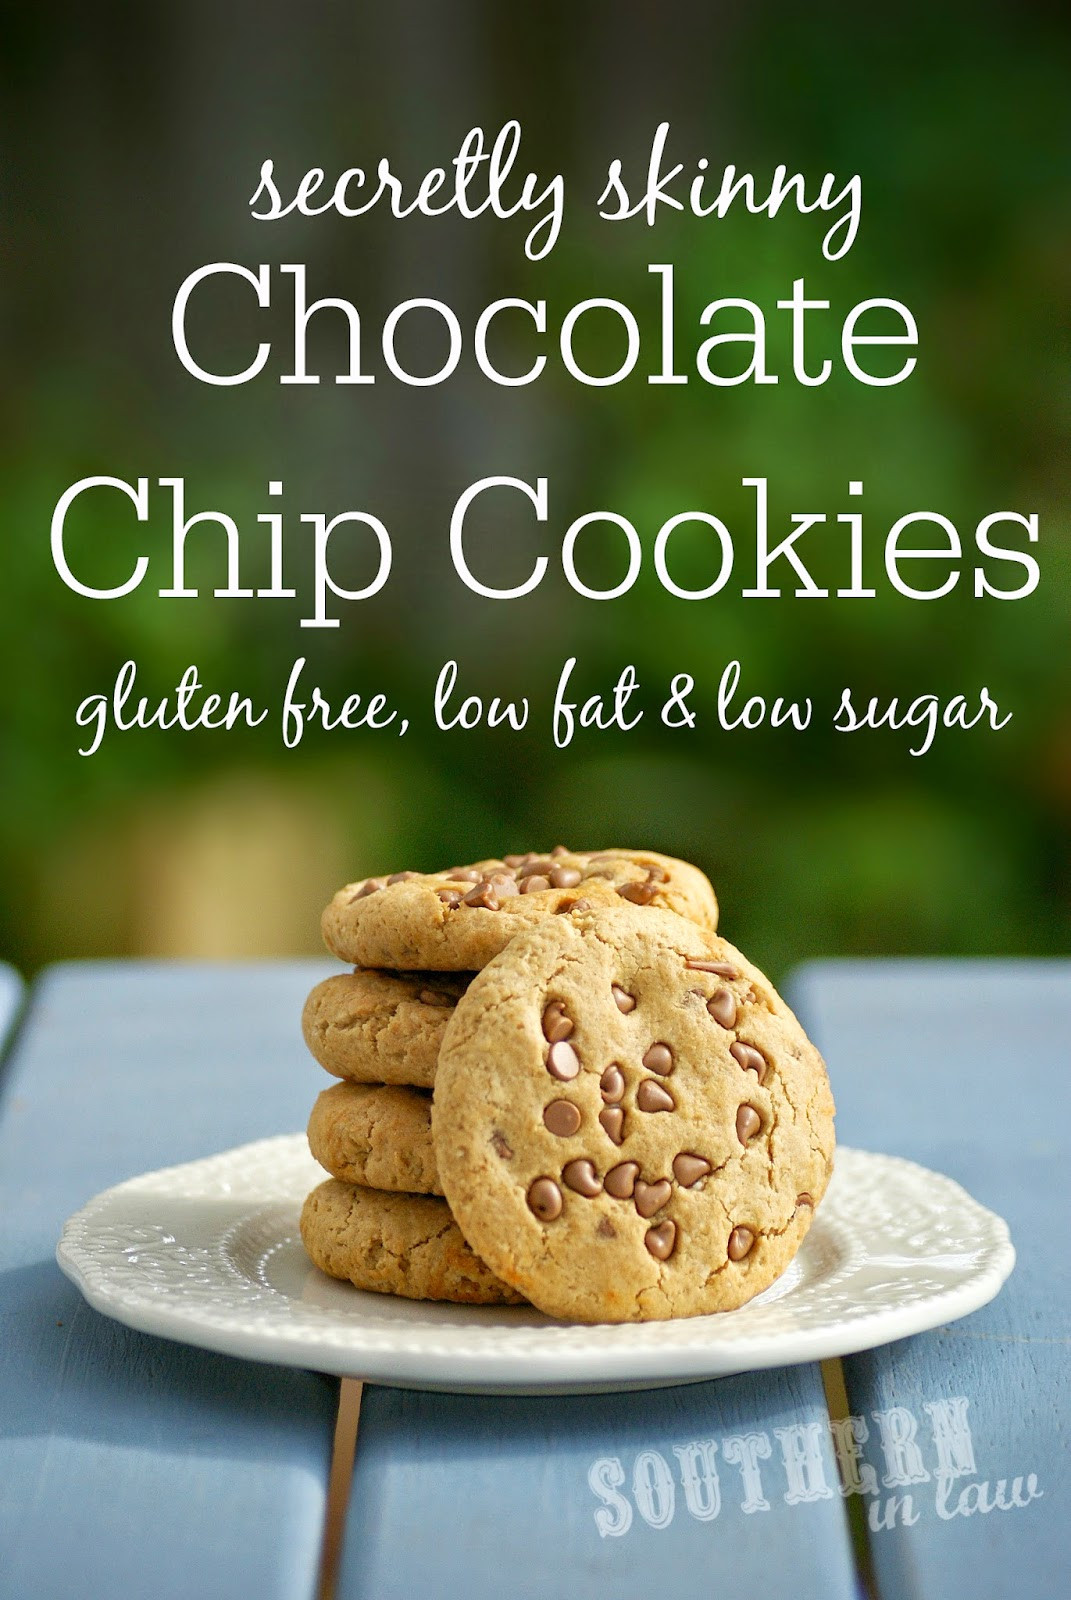 Low Fat Chocolate Chip Cookies Recipe
 Southern In Law Recipe Secretly Skinny Chocolate Chip